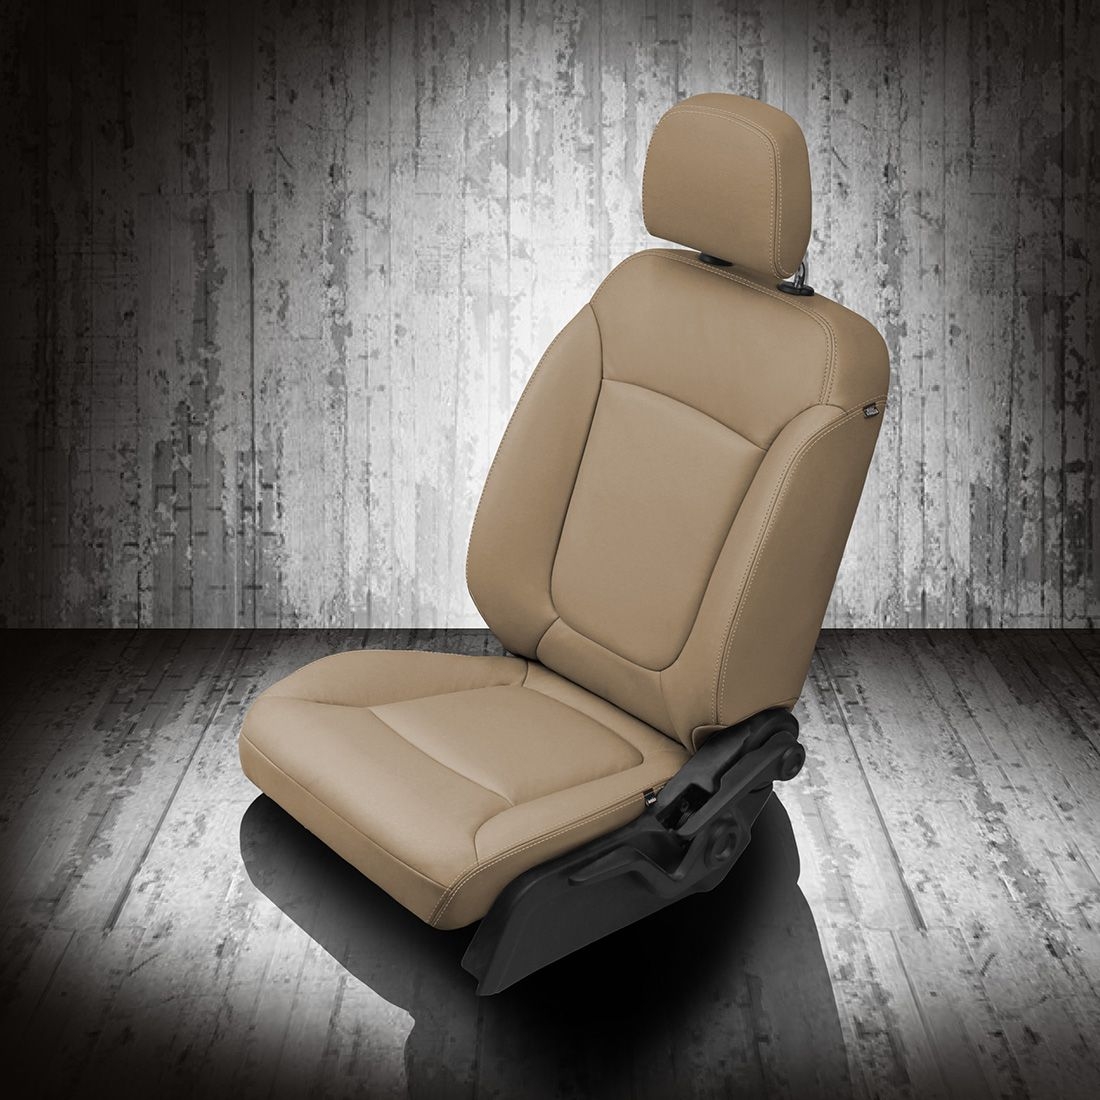 Best Leather Seat Covers (Review & Buying Guide) in 2023